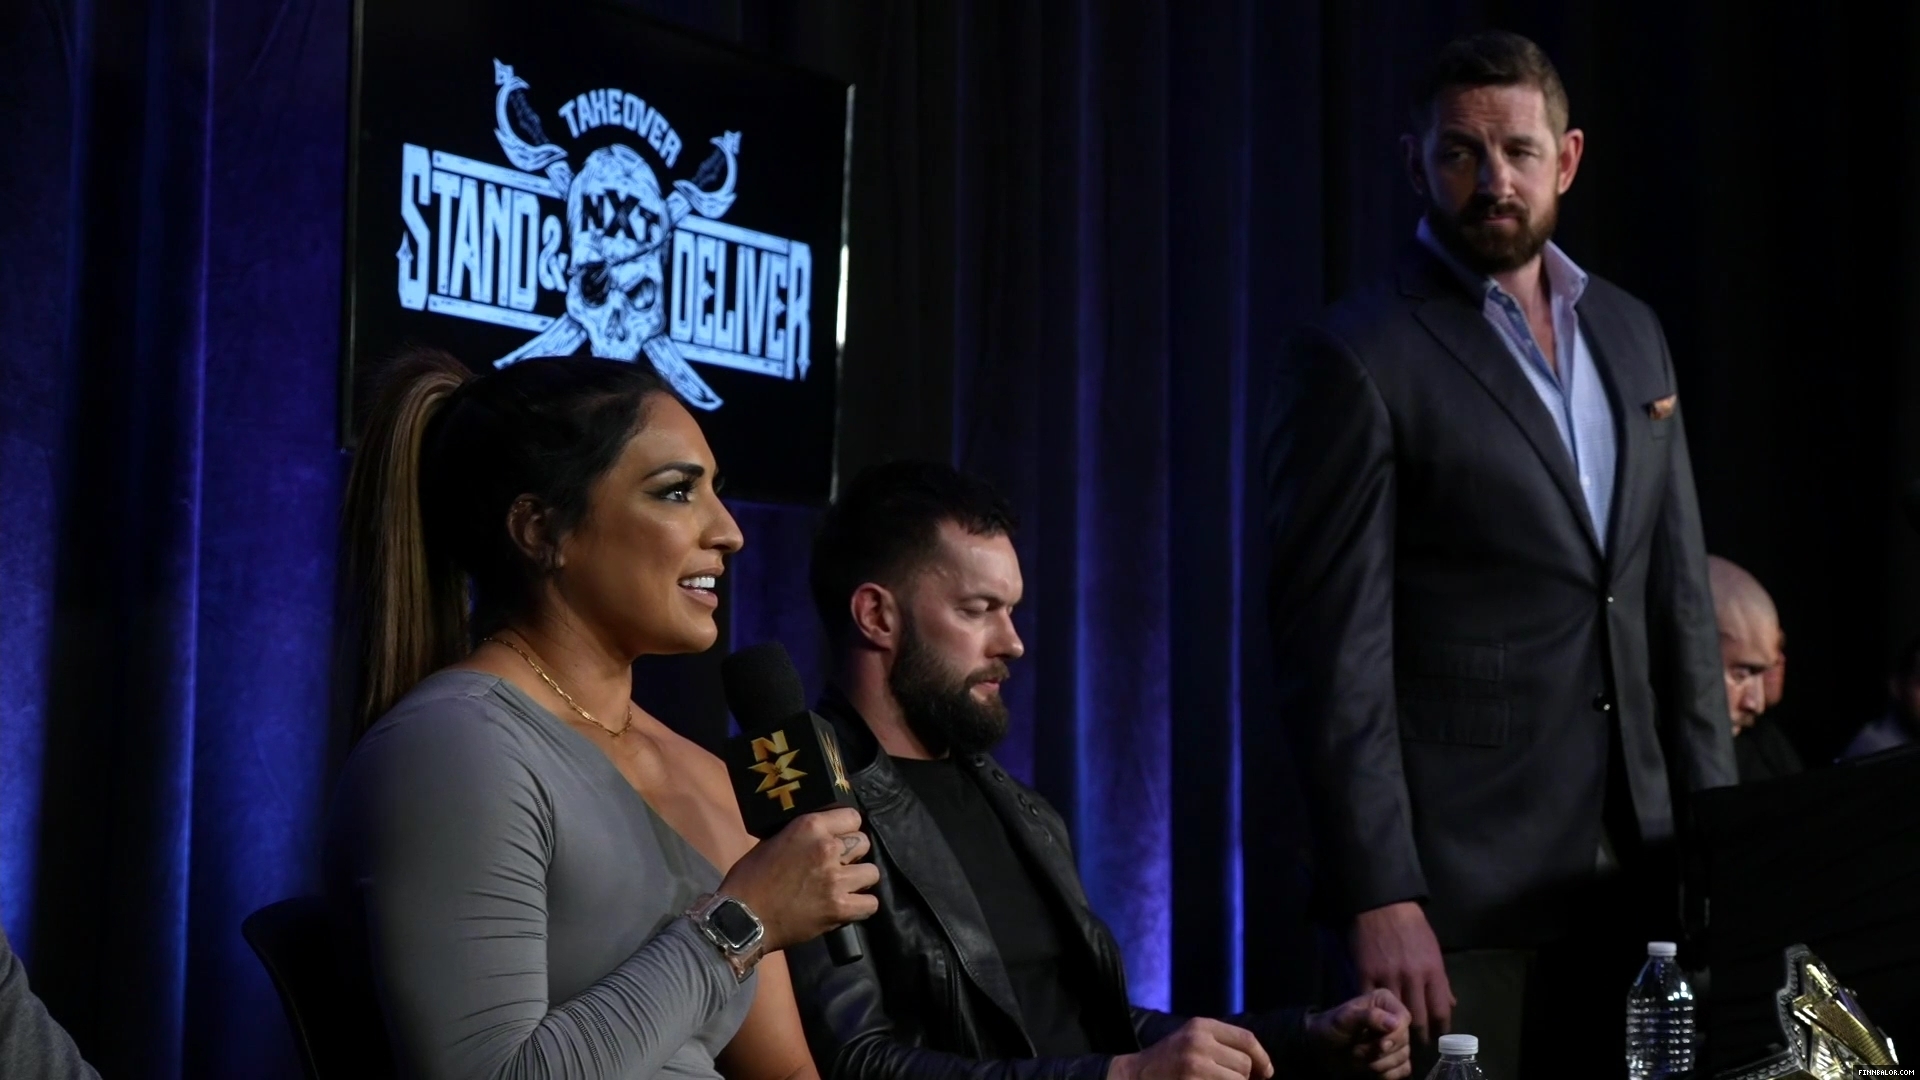 WWE_NXT_TakeOver_Stand_and_Deliver_2021_Global_Press_Conference_1080p_WEB_h264-HEEL_mp41962.jpg